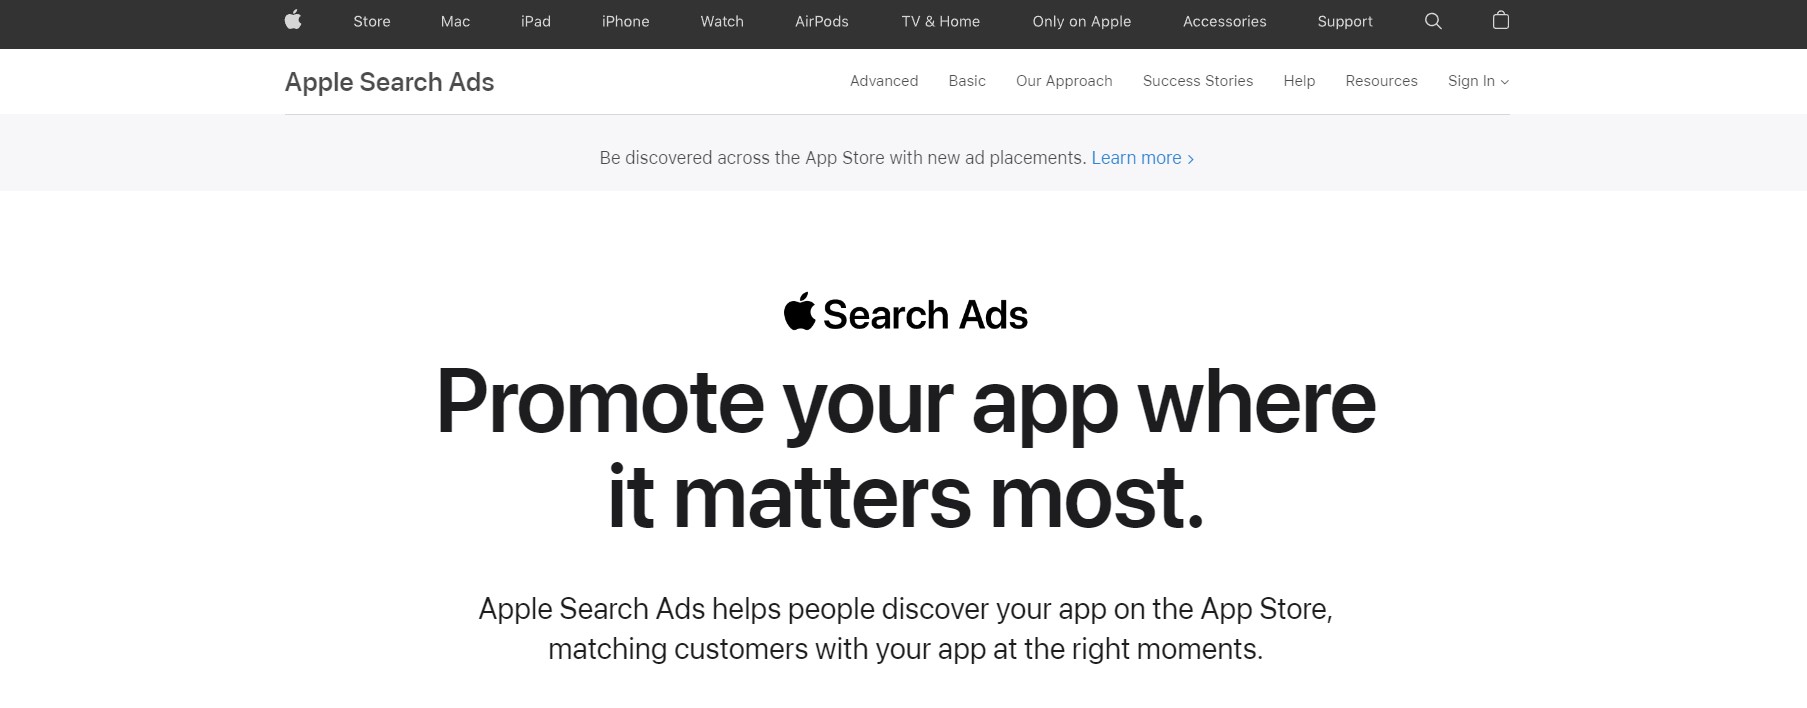 Apple search ads